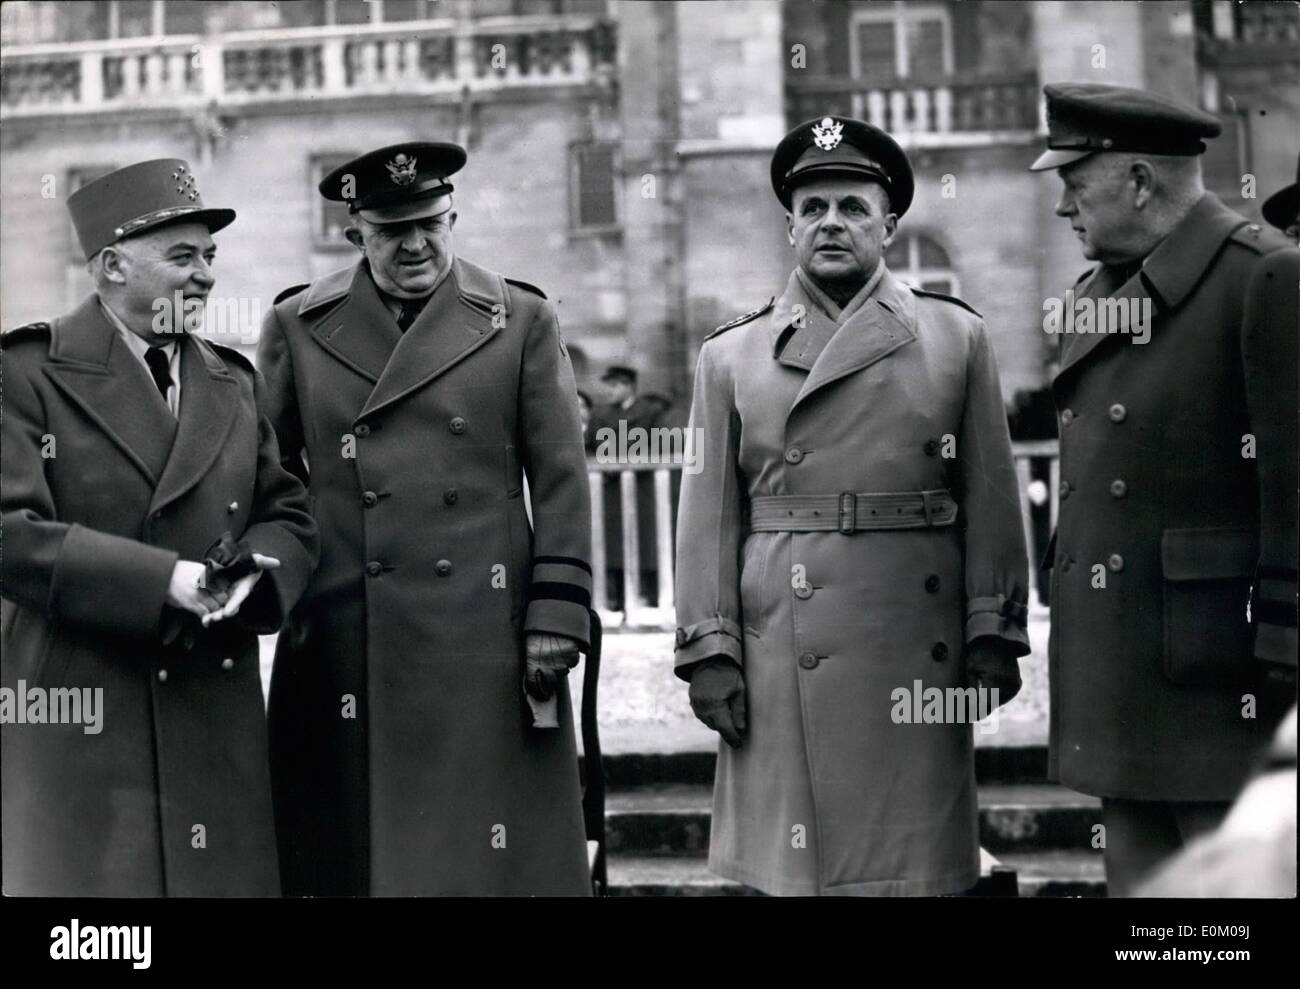 Jan. 01, 1953 - French Uno Battalion Honoured General Matthew S. Ridgway (2nd from right) and Marshal Juin (extreme left) attending the ceremony at Saint-Germain-En Laye when various decorations were awarded to the members of the battalion. Stock Photo